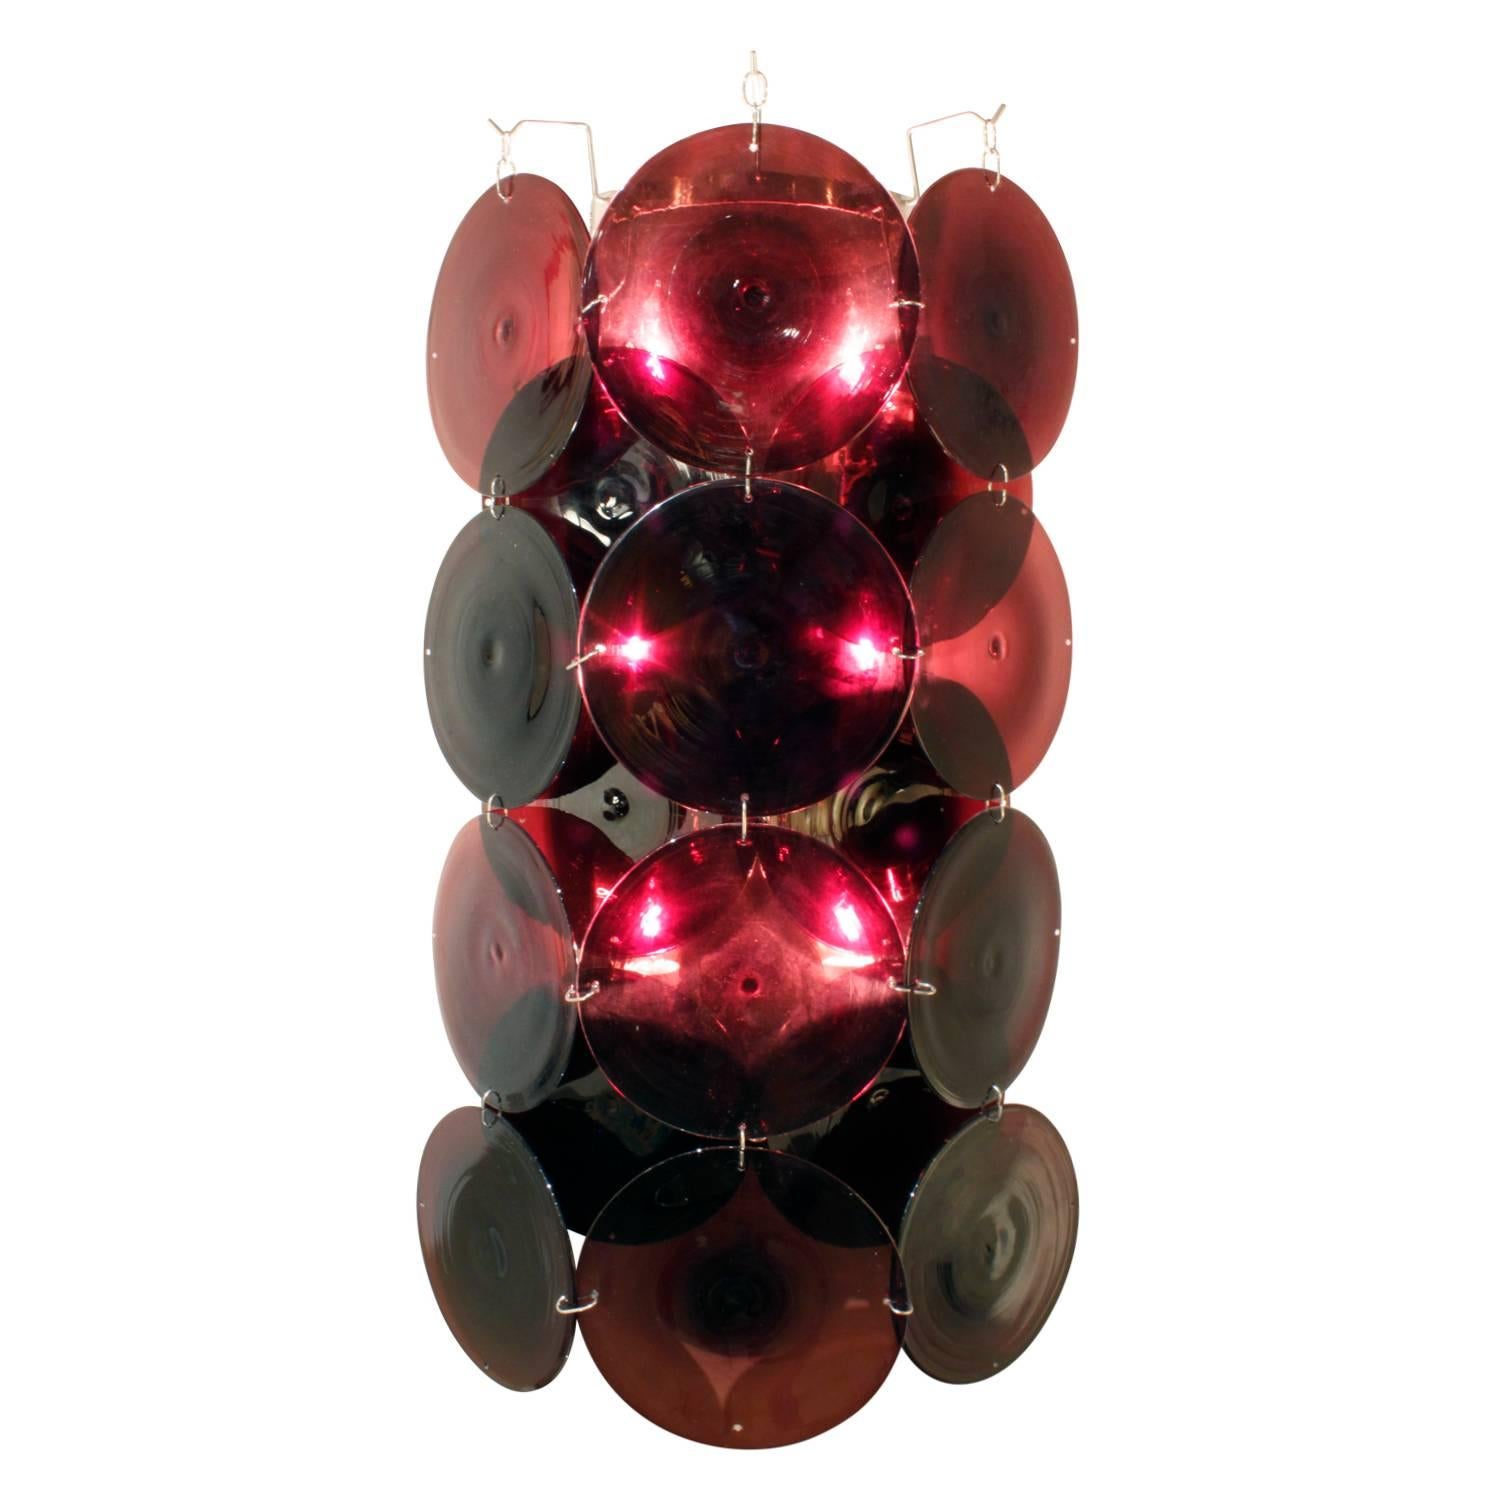 Pair of large sconces with handblown amethyst discs by Vistosi, Murano Italy, 1970s. These sconces are impressive and give off a beautiful light.